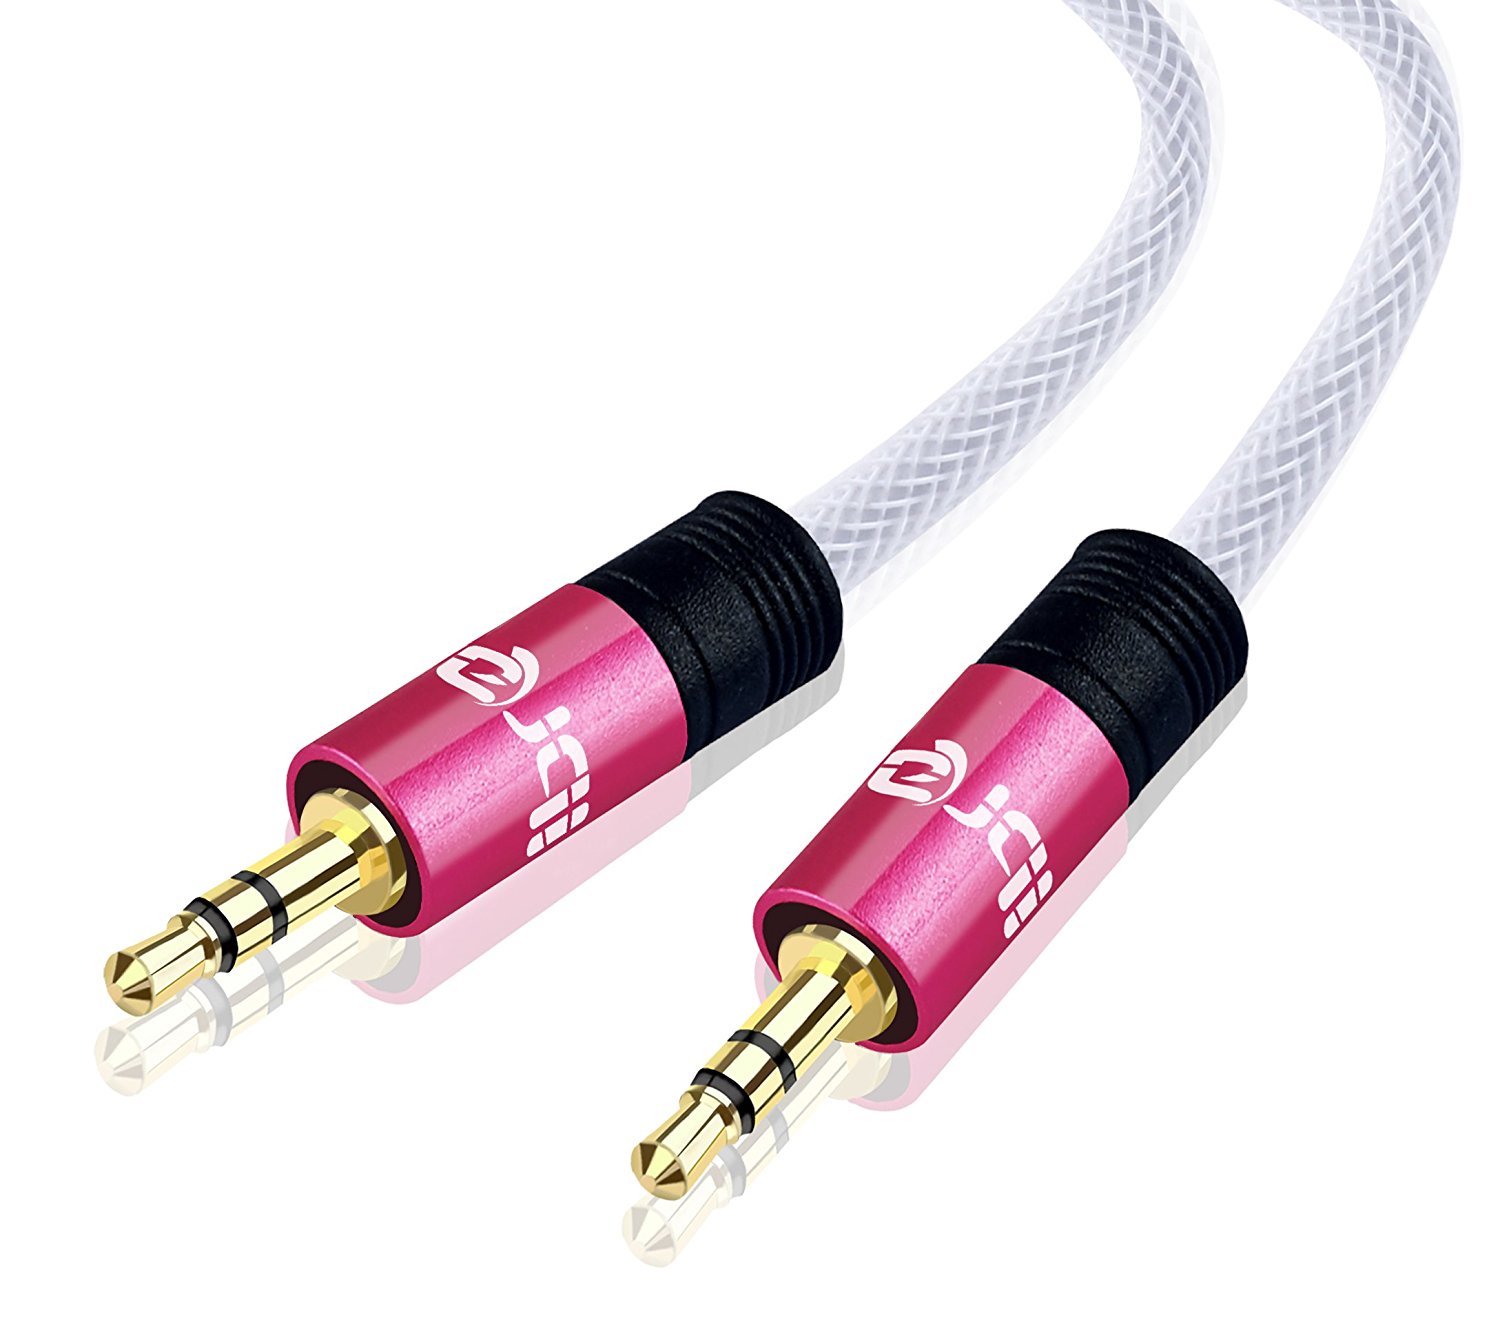 3.5mm Stereo Jack to Jack Audio Cable Lead Gold 1.5m- IBRA Pink Series